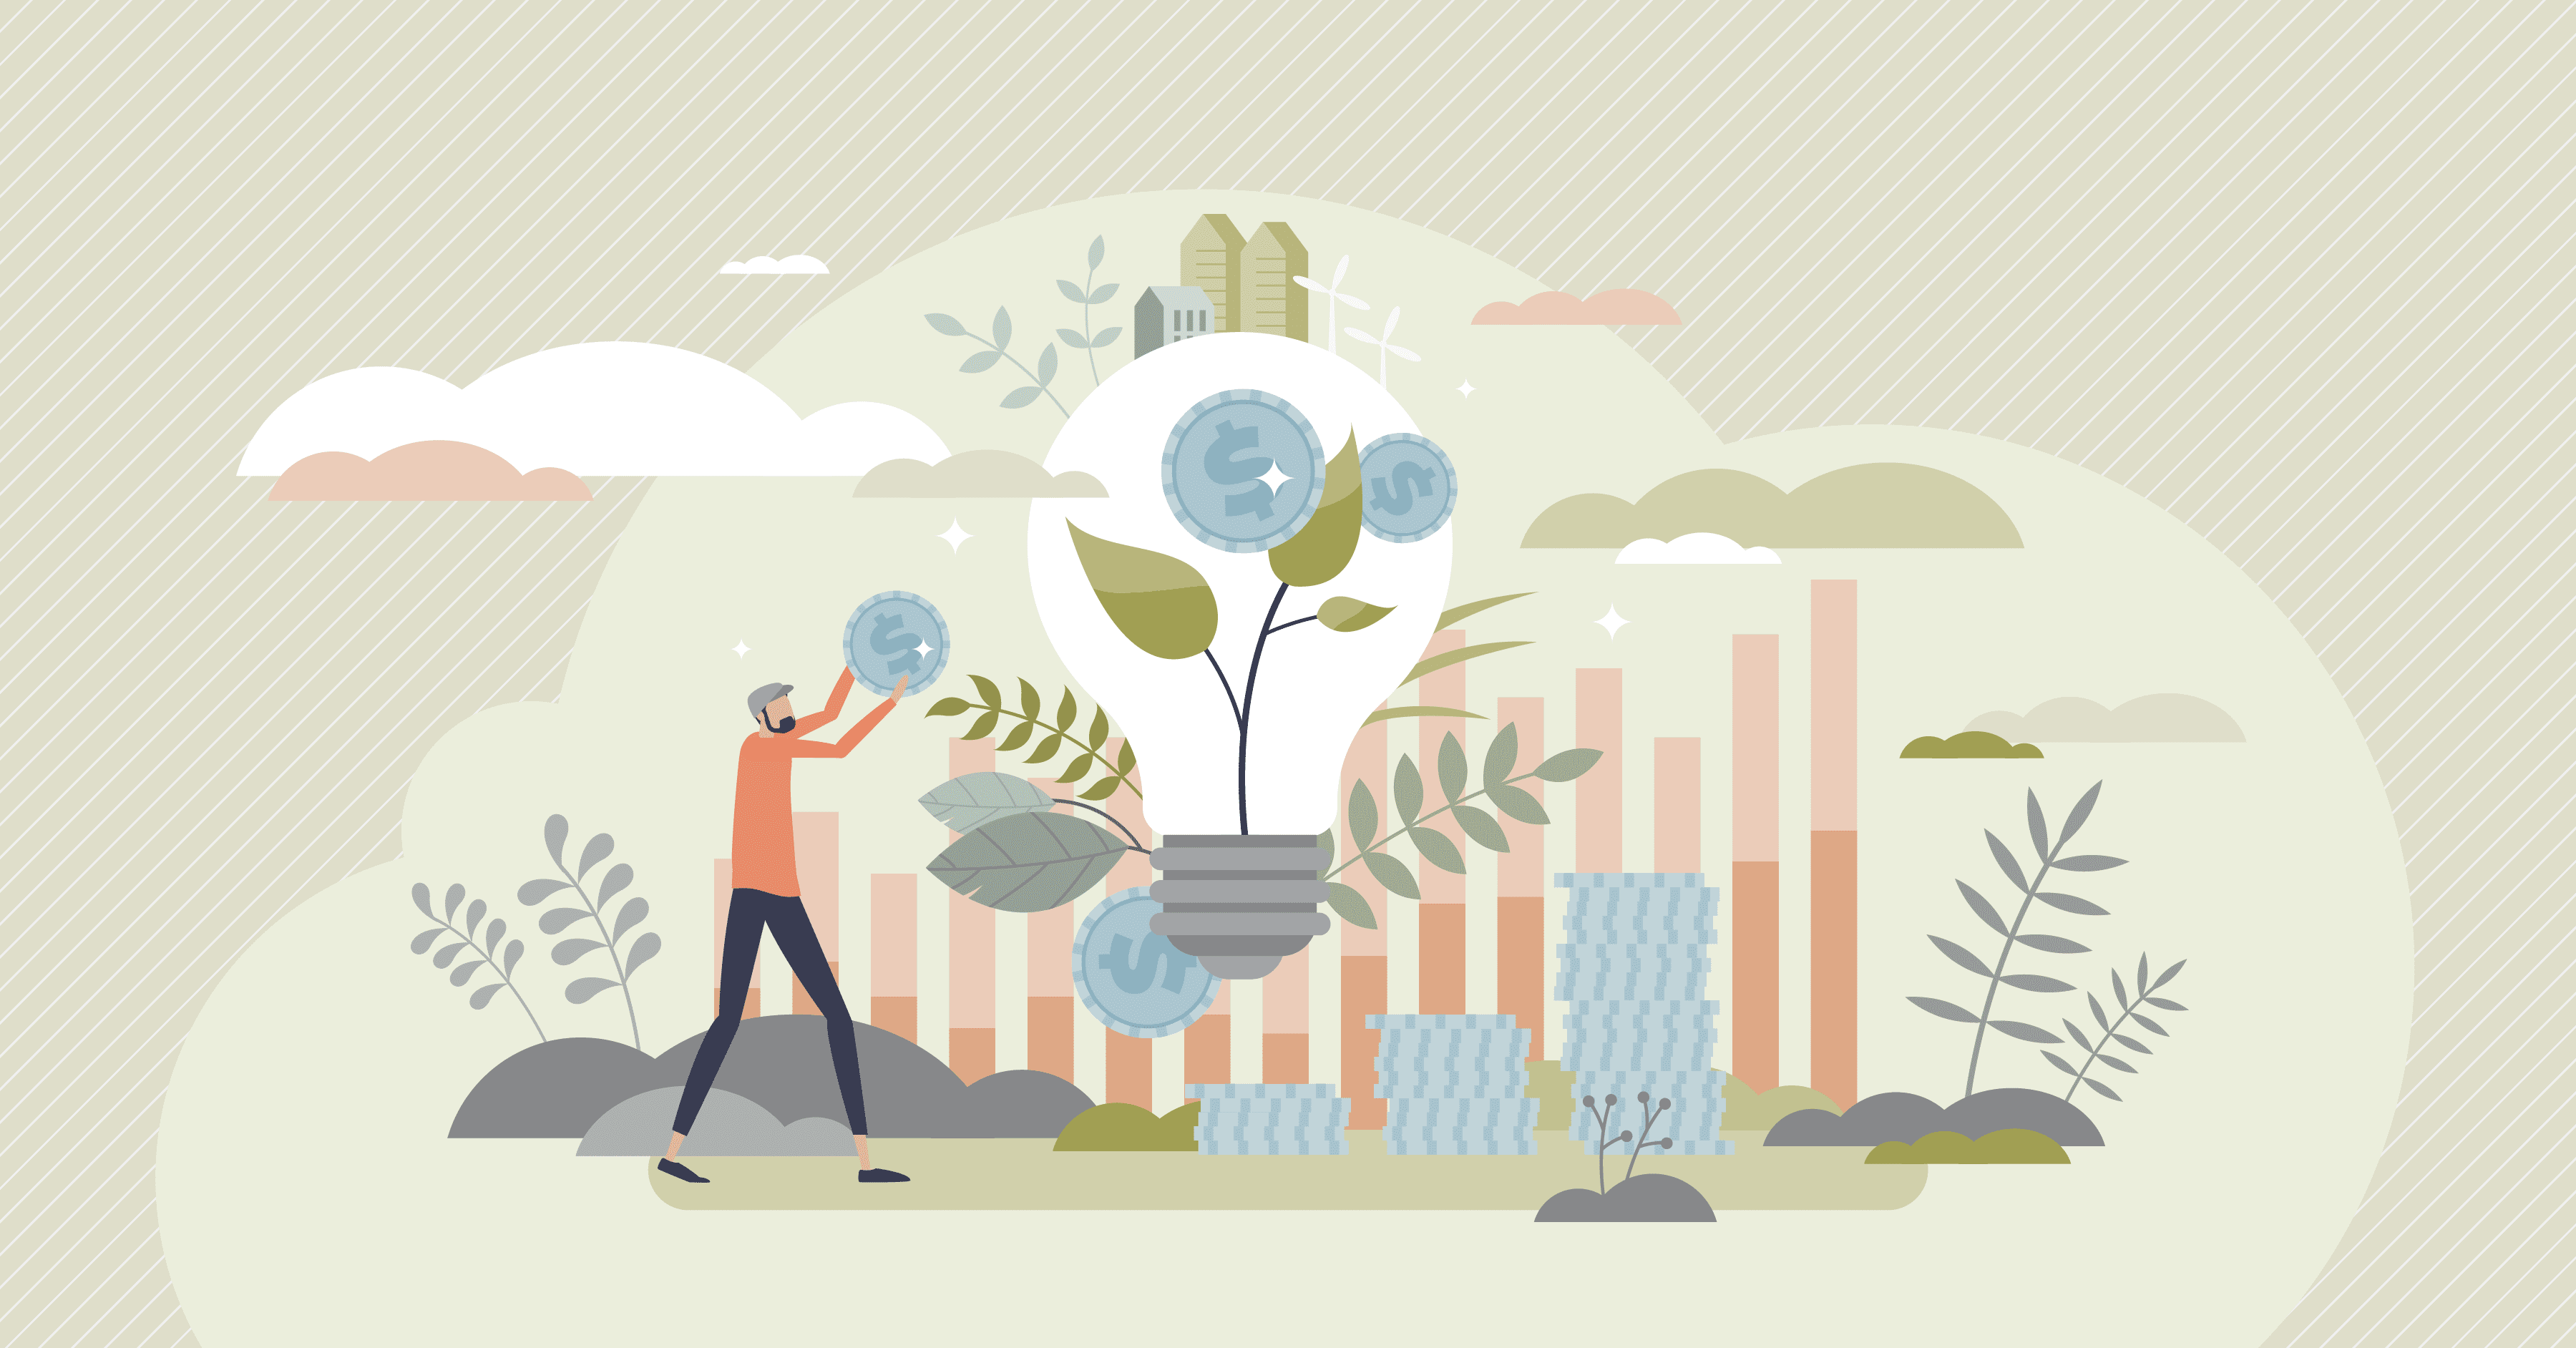 Illustration of a person nurturing a plant growing inside a light bulb, symbolizing the growth of eco-friendly ideas amidst an urban backdrop.